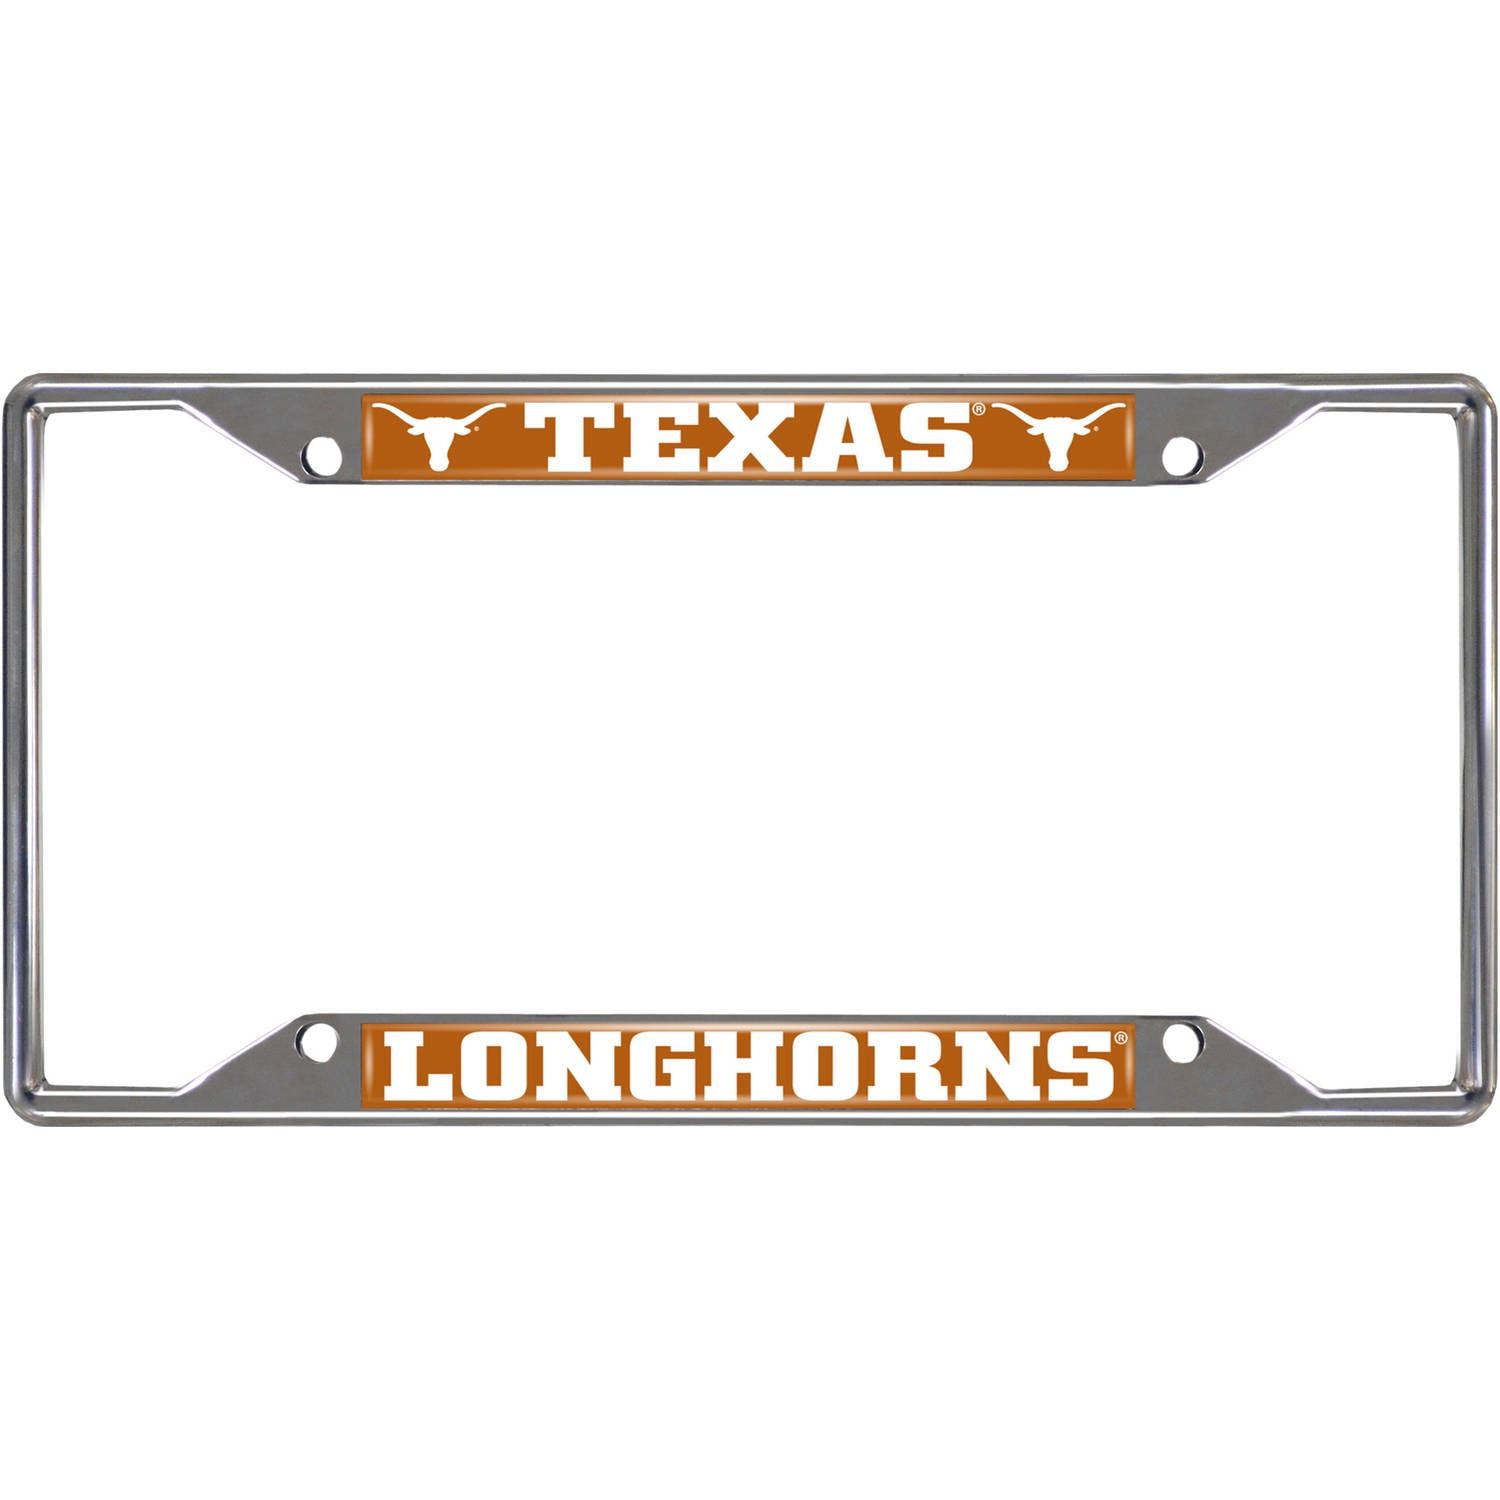 ORANGE TIGER ZEBRA PRINT CUSTOM PERSONALIZED WITH YOUR TEXT  License Plate Frame